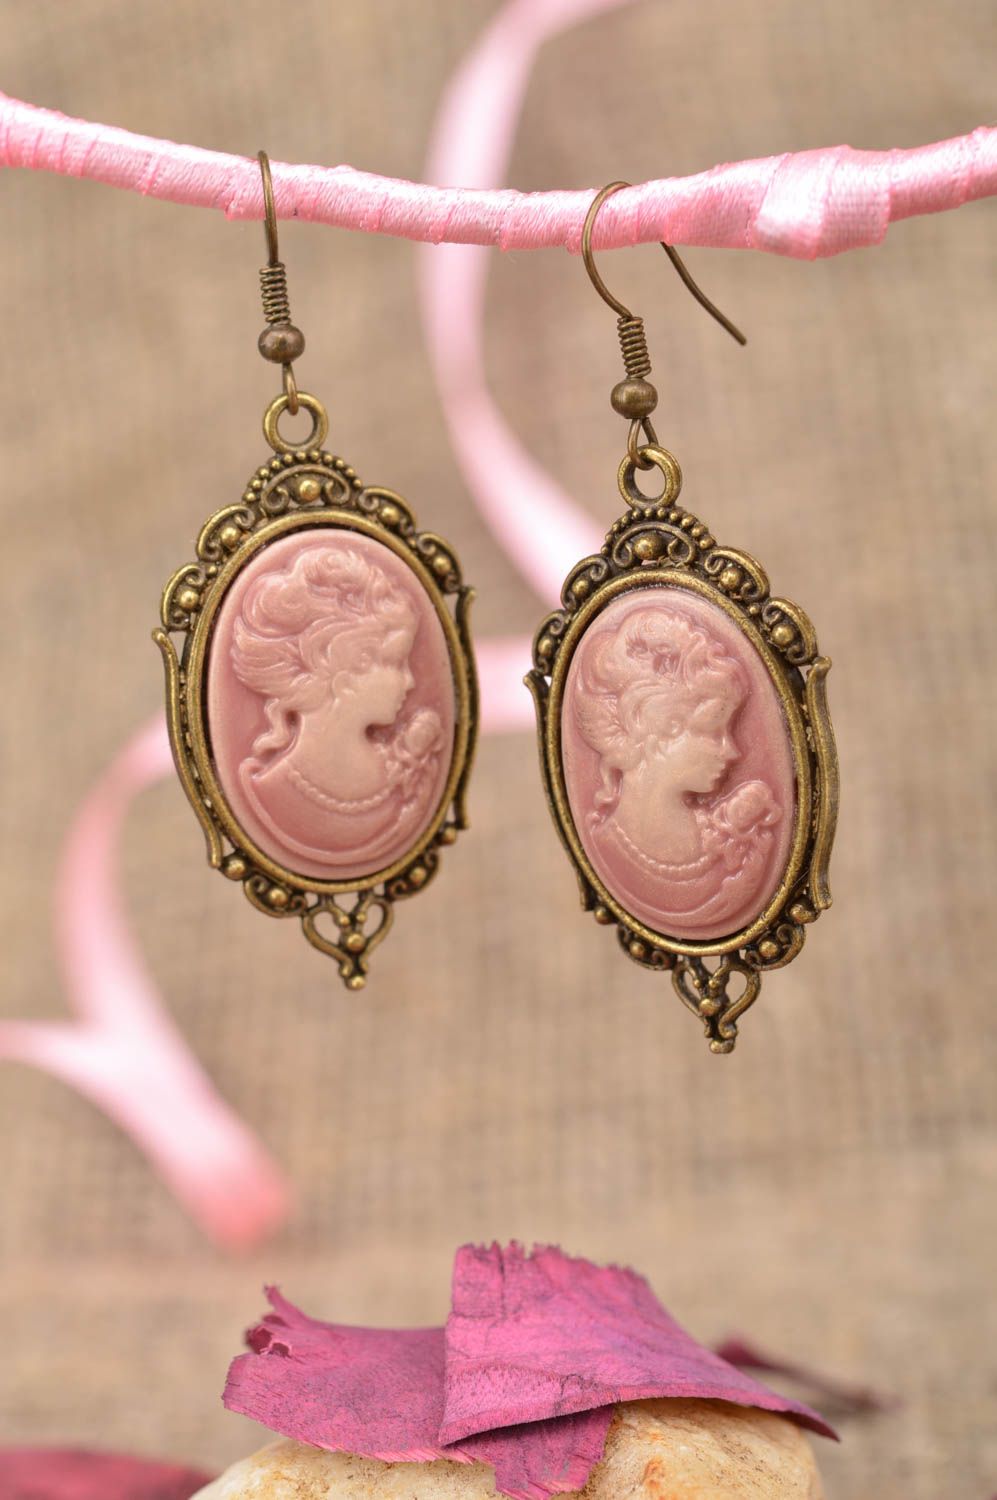 Beautiful homemade designer cameo earrings with metal frame in vintage style photo 1